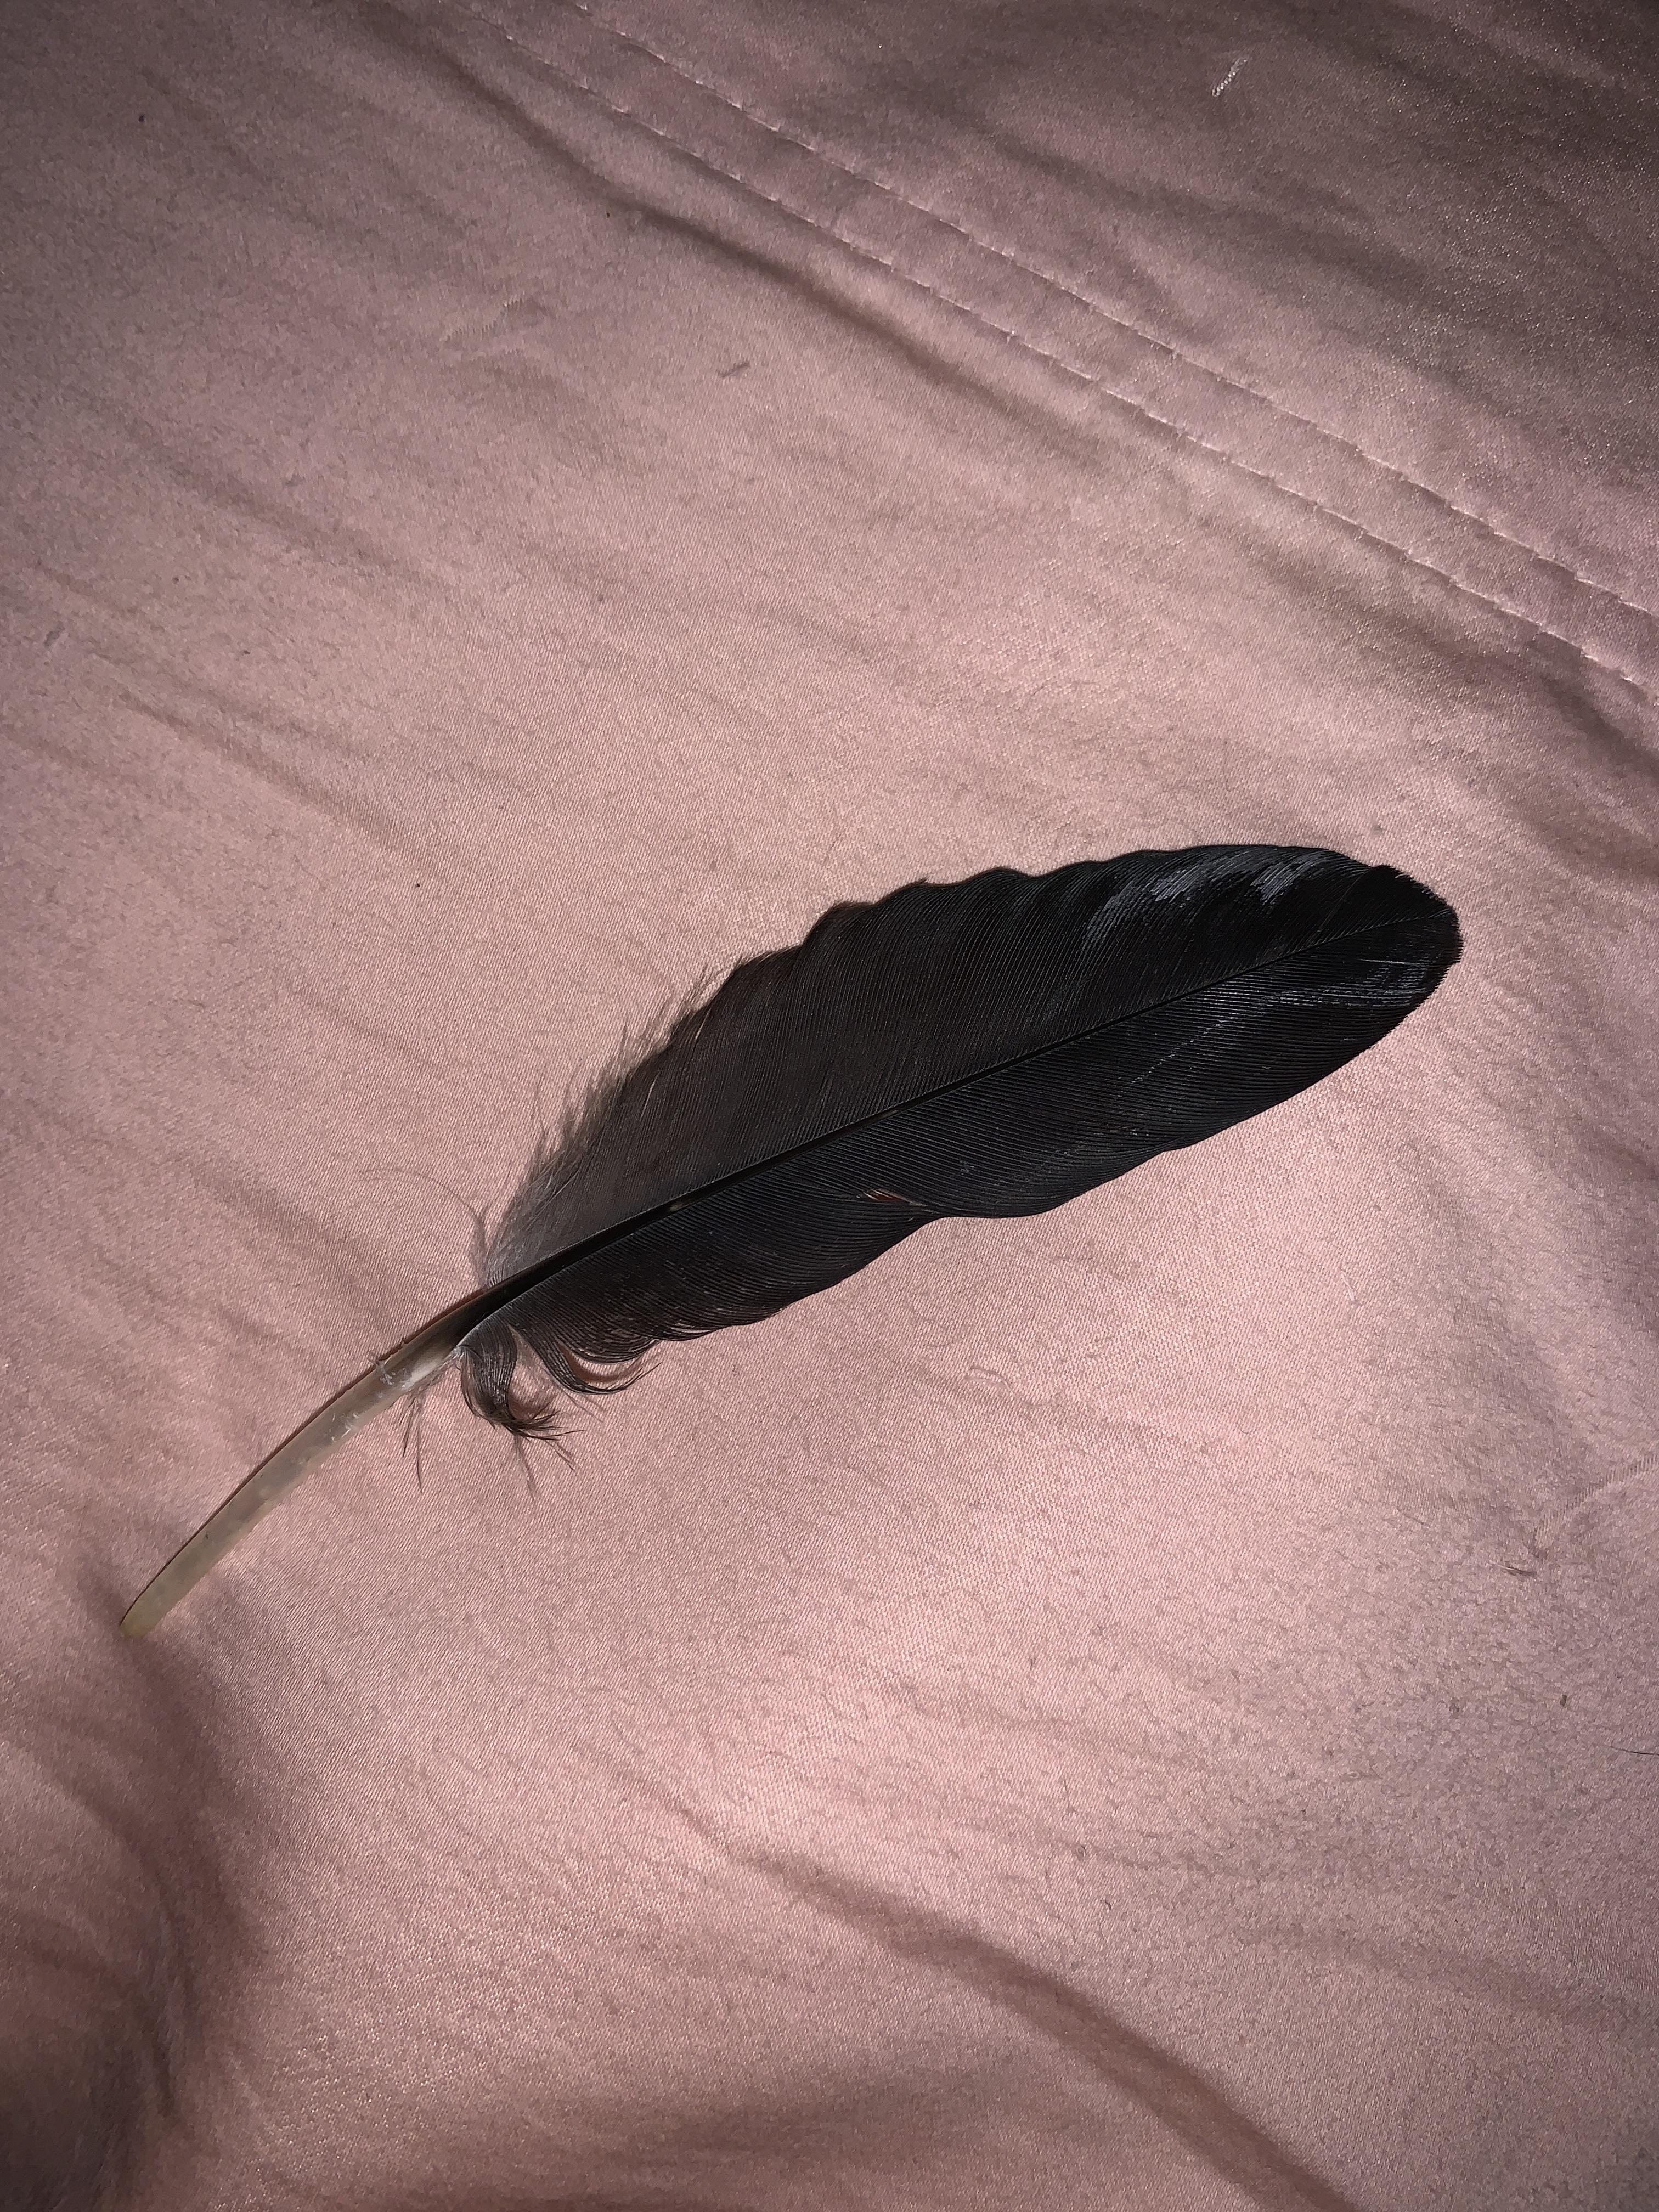 A black feather lies on a pink bed sheet. - Feathers